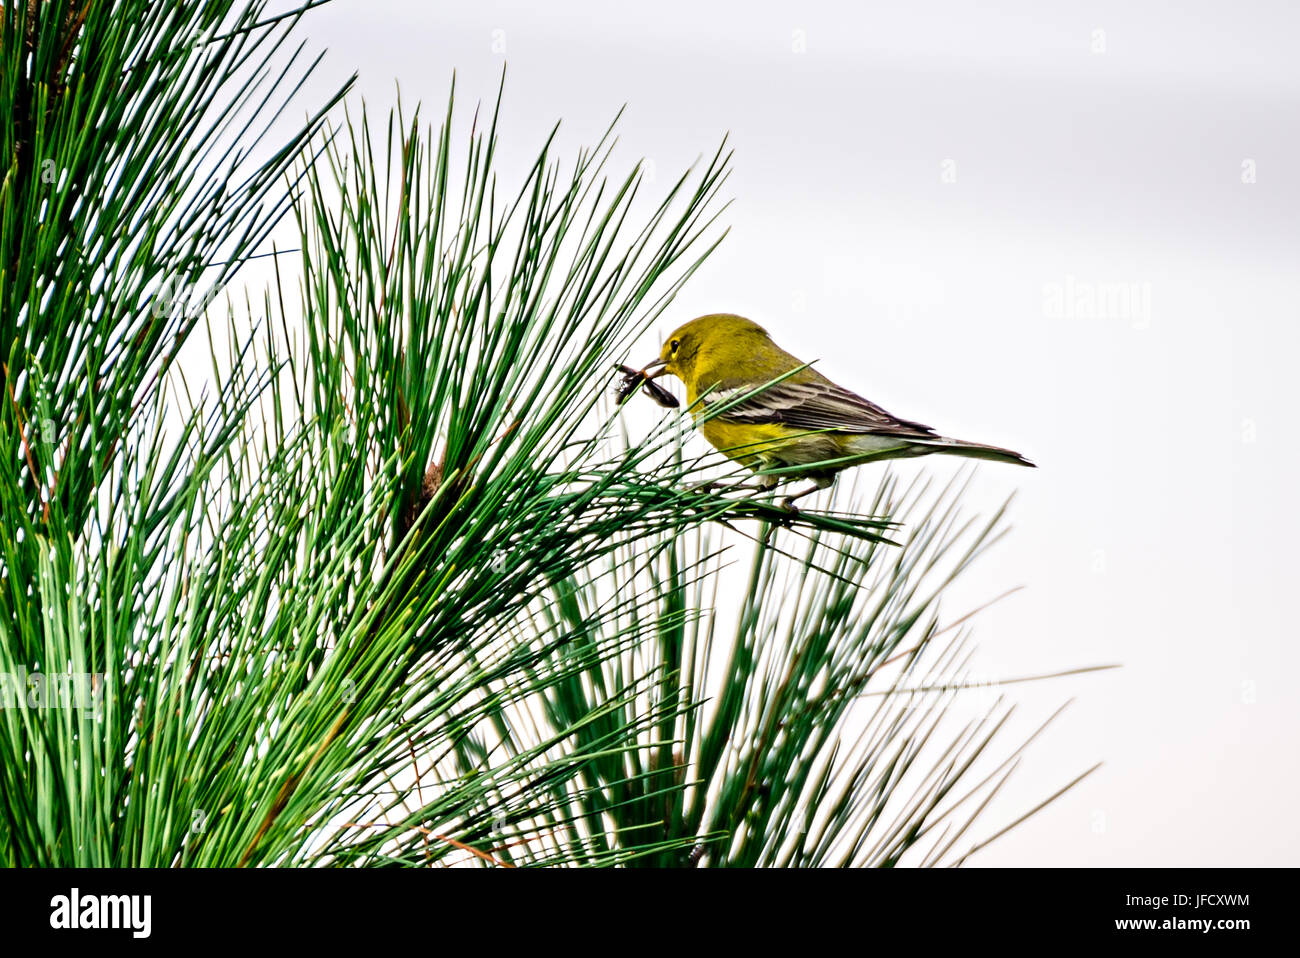 tiny bird perched on top of evergreen tree Stock Photo